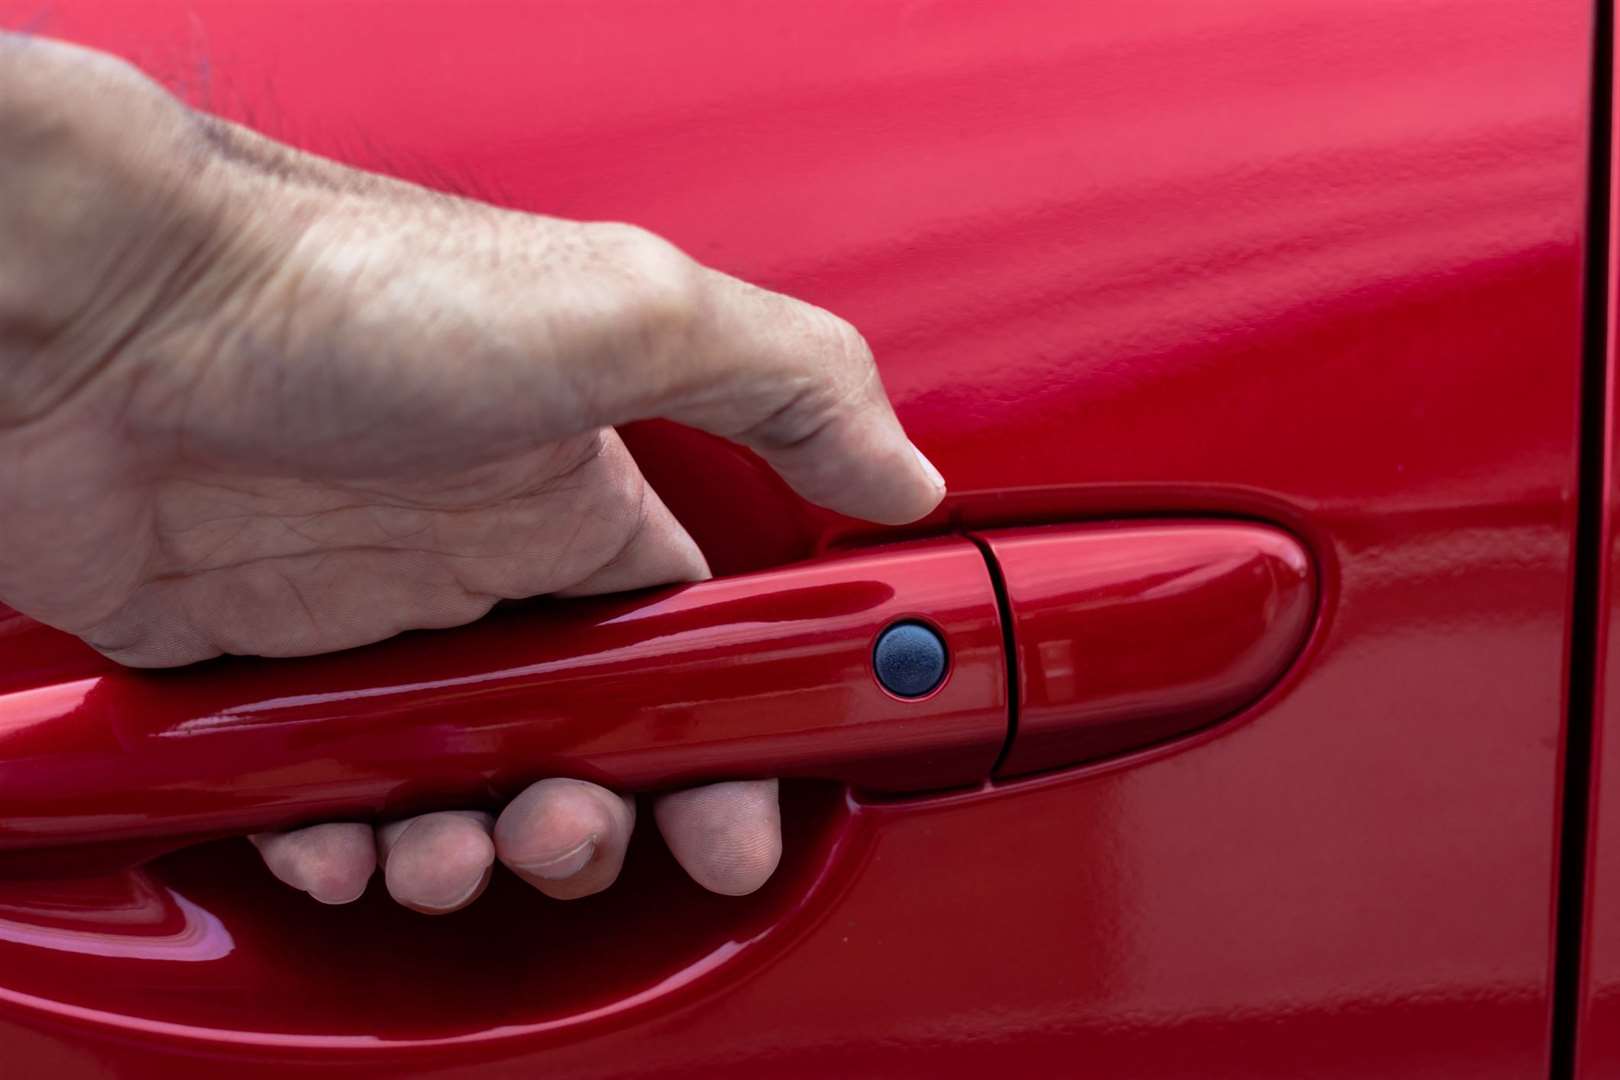 Insurance experts say people must do more to protect their keys if they have a keyless entry system. Photo: iStock.